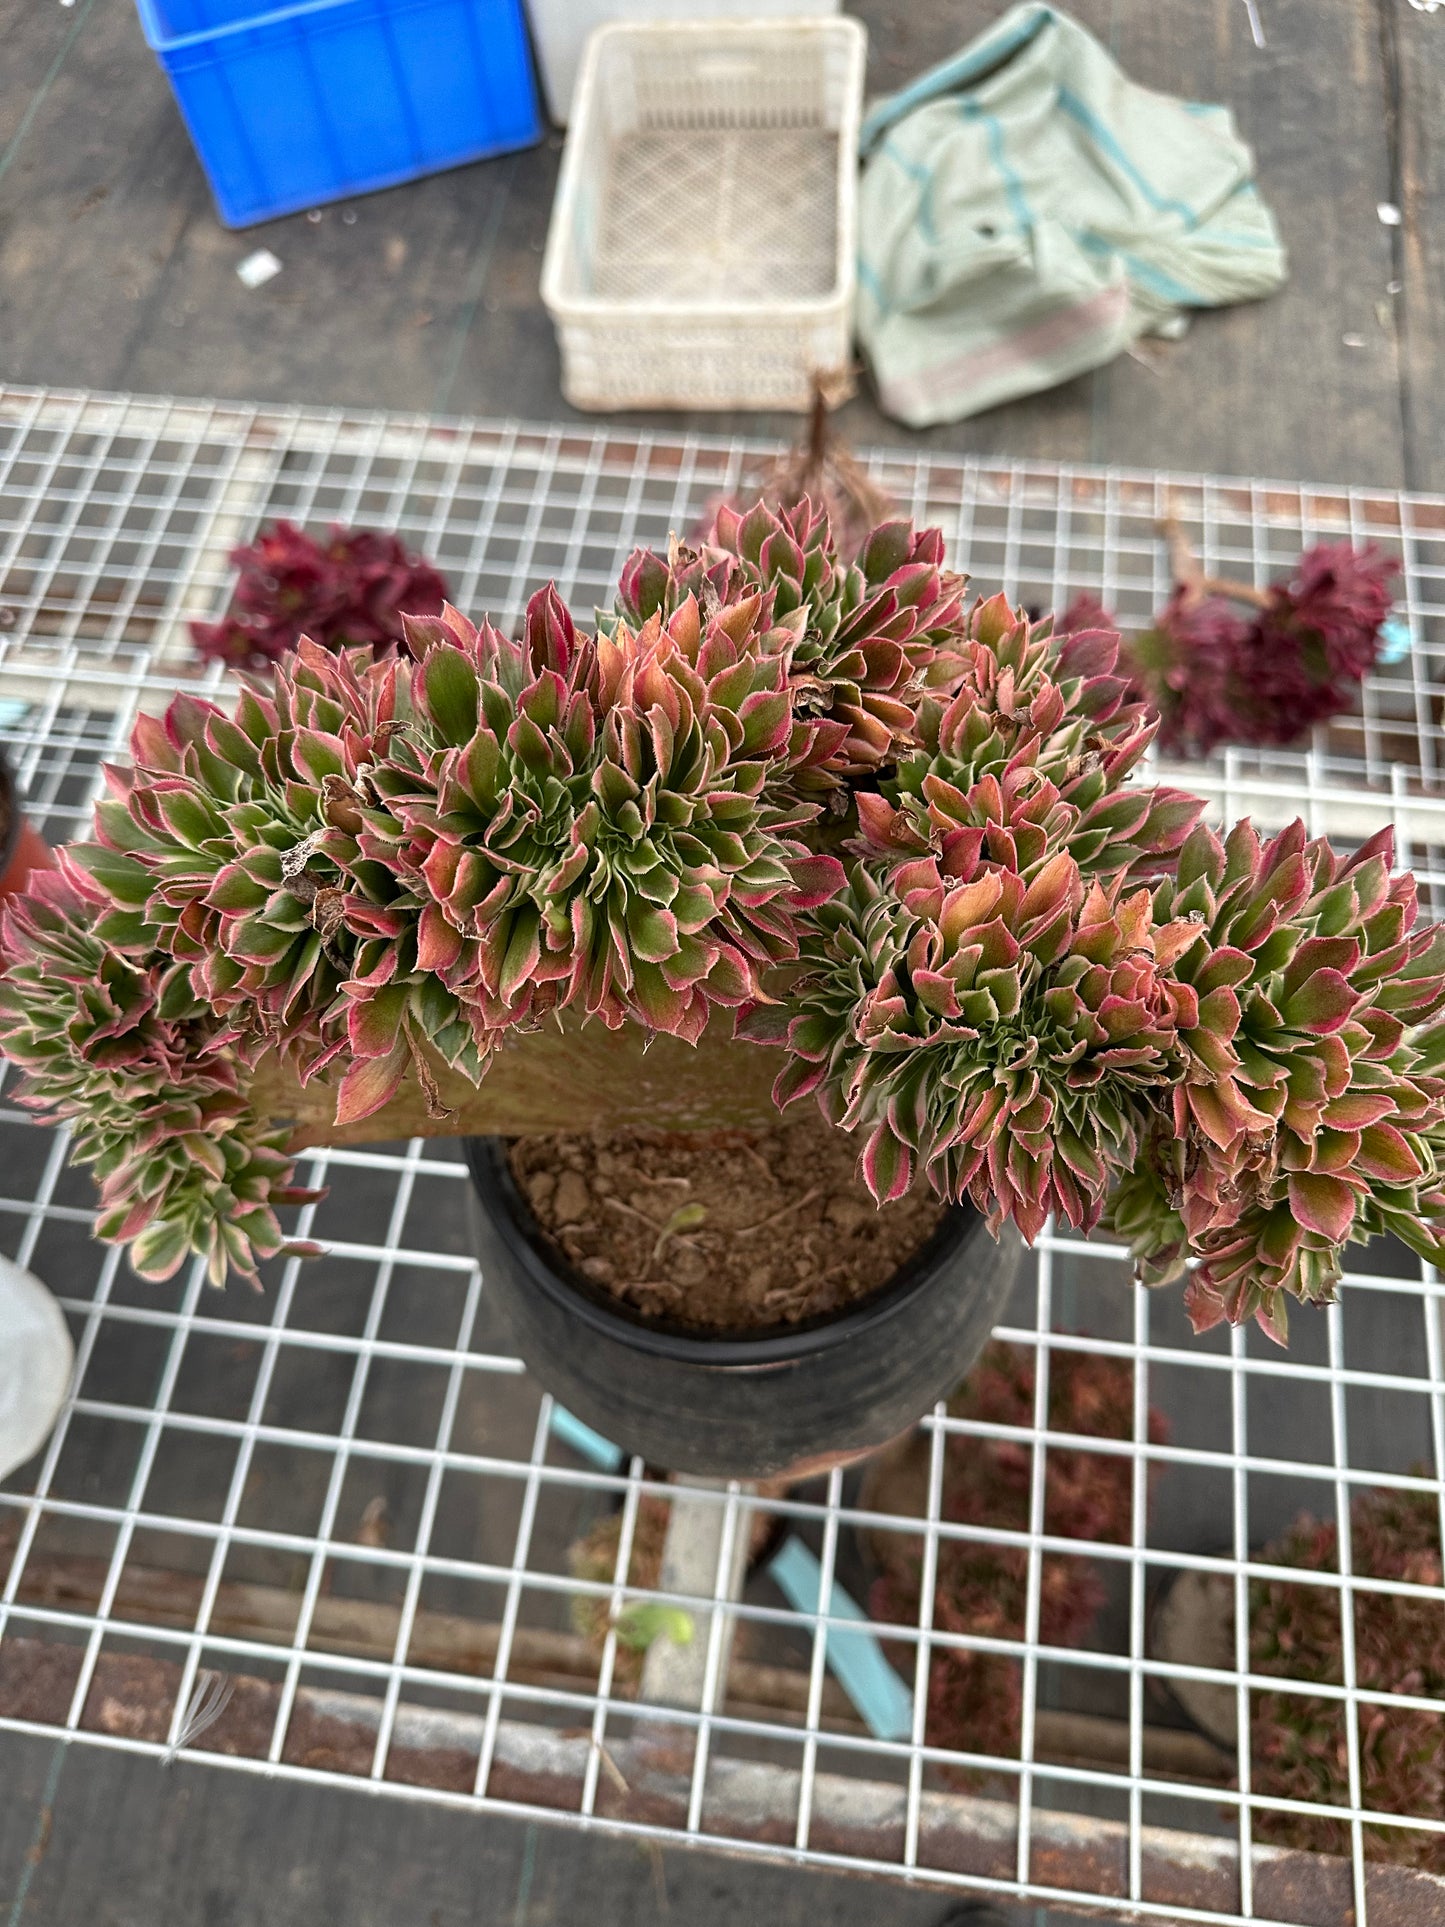 Pink witch drawbenchcrested 35cm has roots/Aeonium Affix / Variegated Natural Live Plants Succulents/NO.1